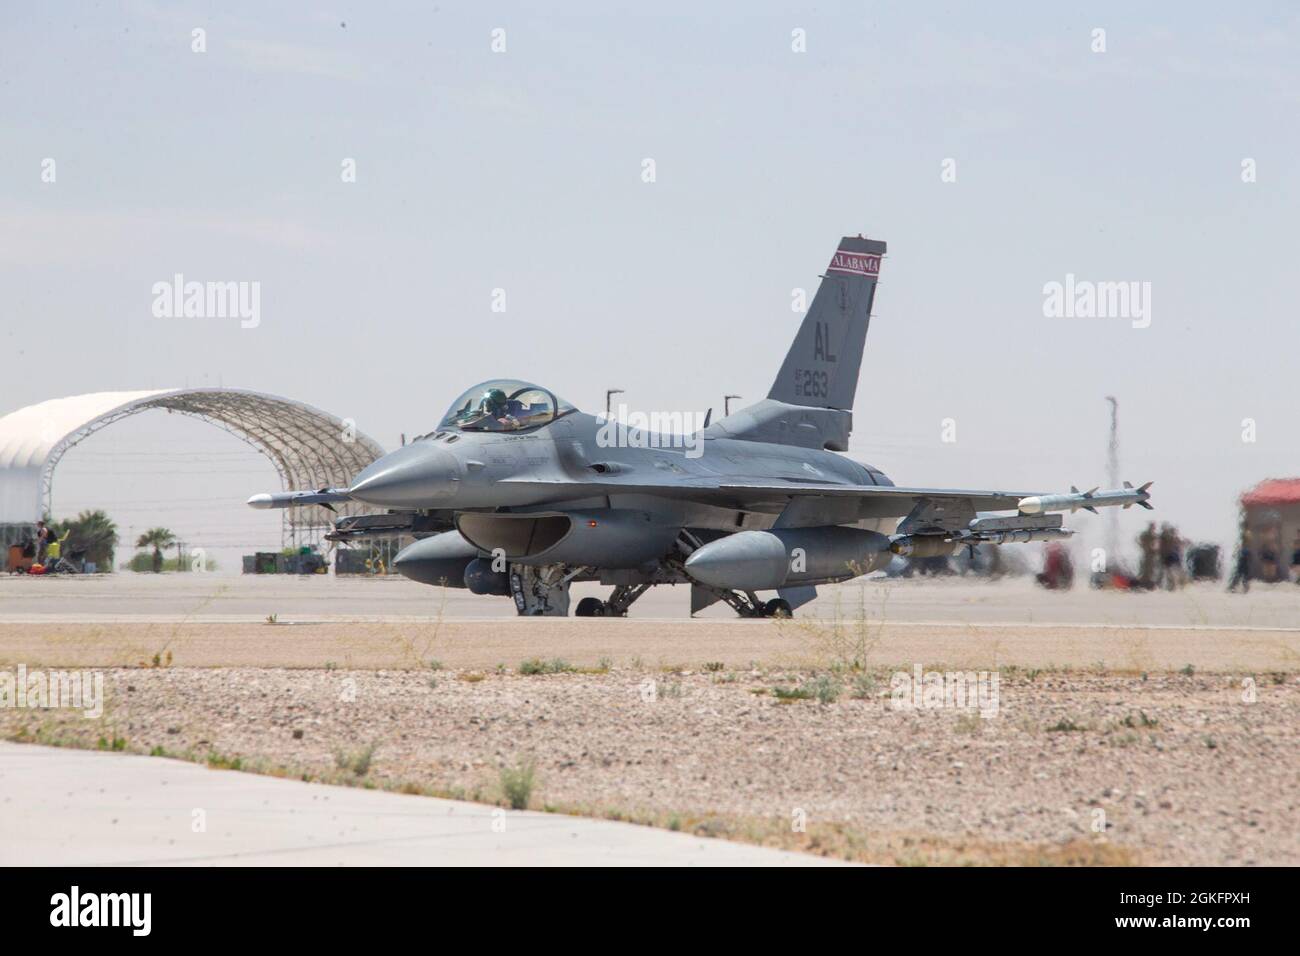 A U.S. Air Force F-16 Fighting Falcon, taxis the flight line prior to departure in support of Weapons and Tactics Instructor (WTI) course 2-21, at Marine Corps Air Station Yuma, Ariz., April 10, 2021. The WTI course is a seven-week training event hosted by Marine Aviation Weapons and Tactics Squadron One (MAWTS-1), providing standardized advanced tactical training certification of unit instructors qualifications to support Marine aviation training and readiness, and assists in developing and employing aviation weapons and tactics. Stock Photo